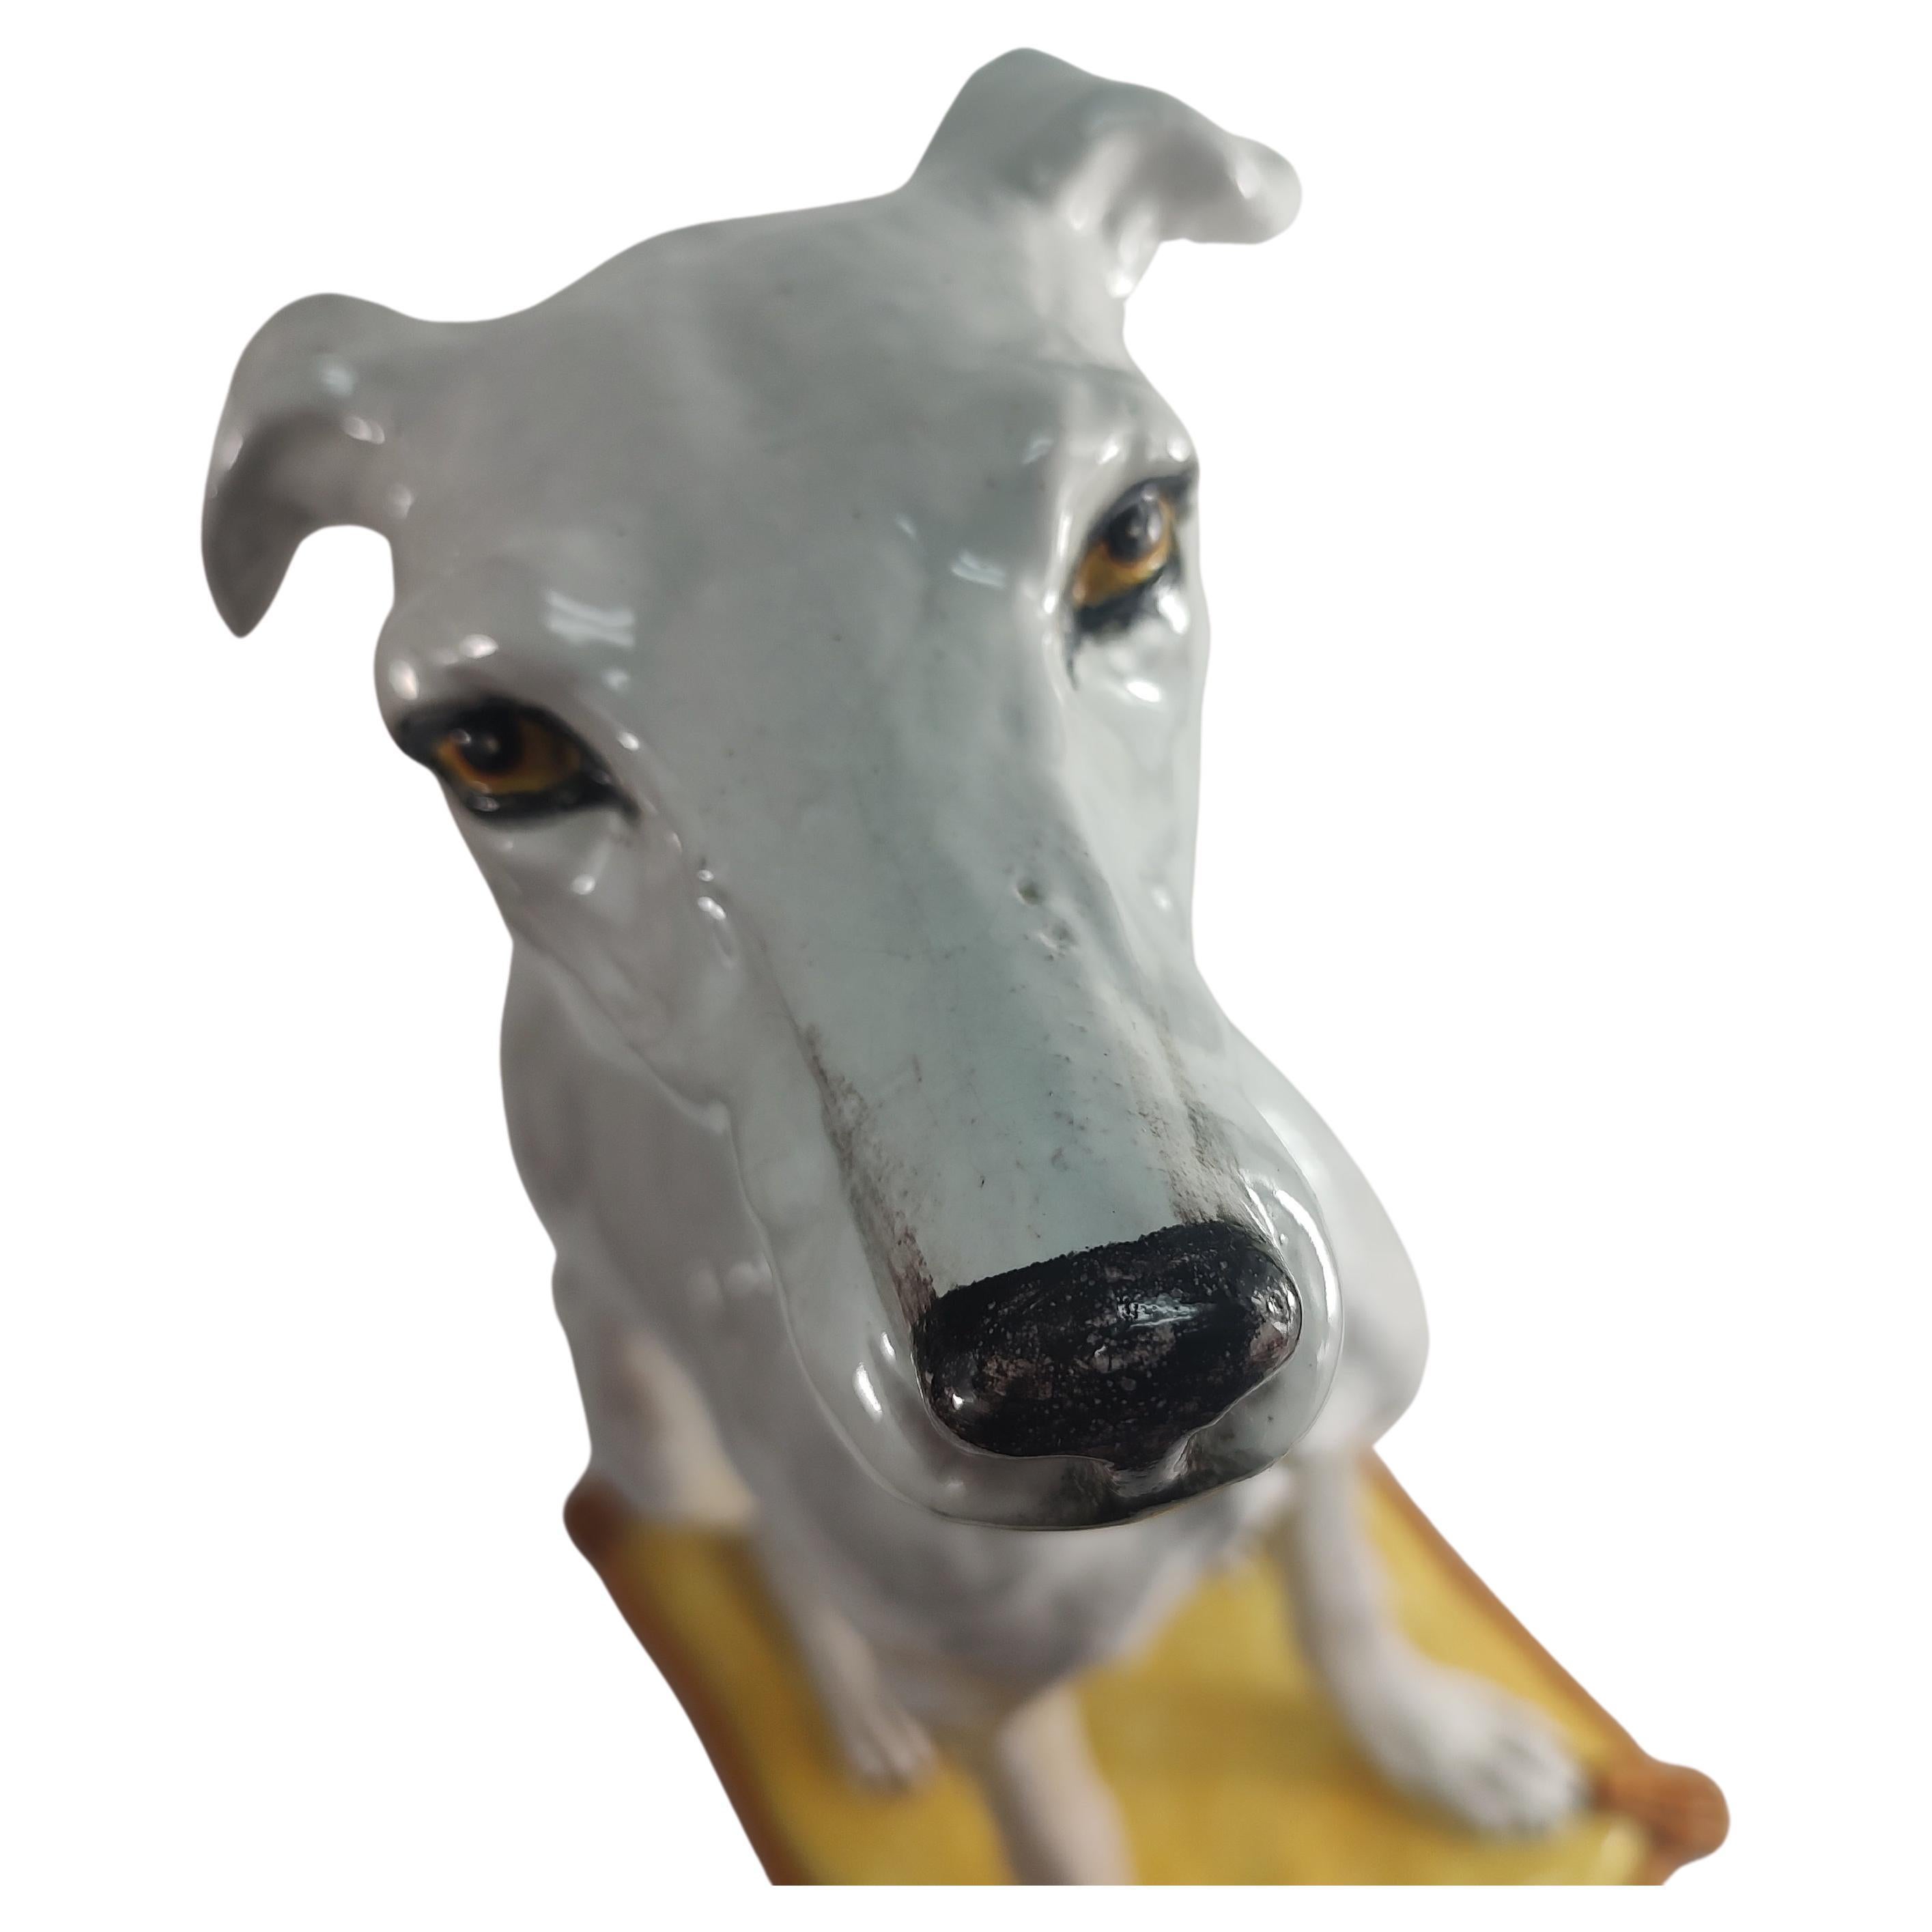 Fabulous and elegant porcelain life size figure of a female whippet. Absolutely so real life like it's amazing! Such a beautiful face you want to hug this dog. 11 x 20 x 24h and weighs approximately 35lbs. Made from terracotta and then glazed with